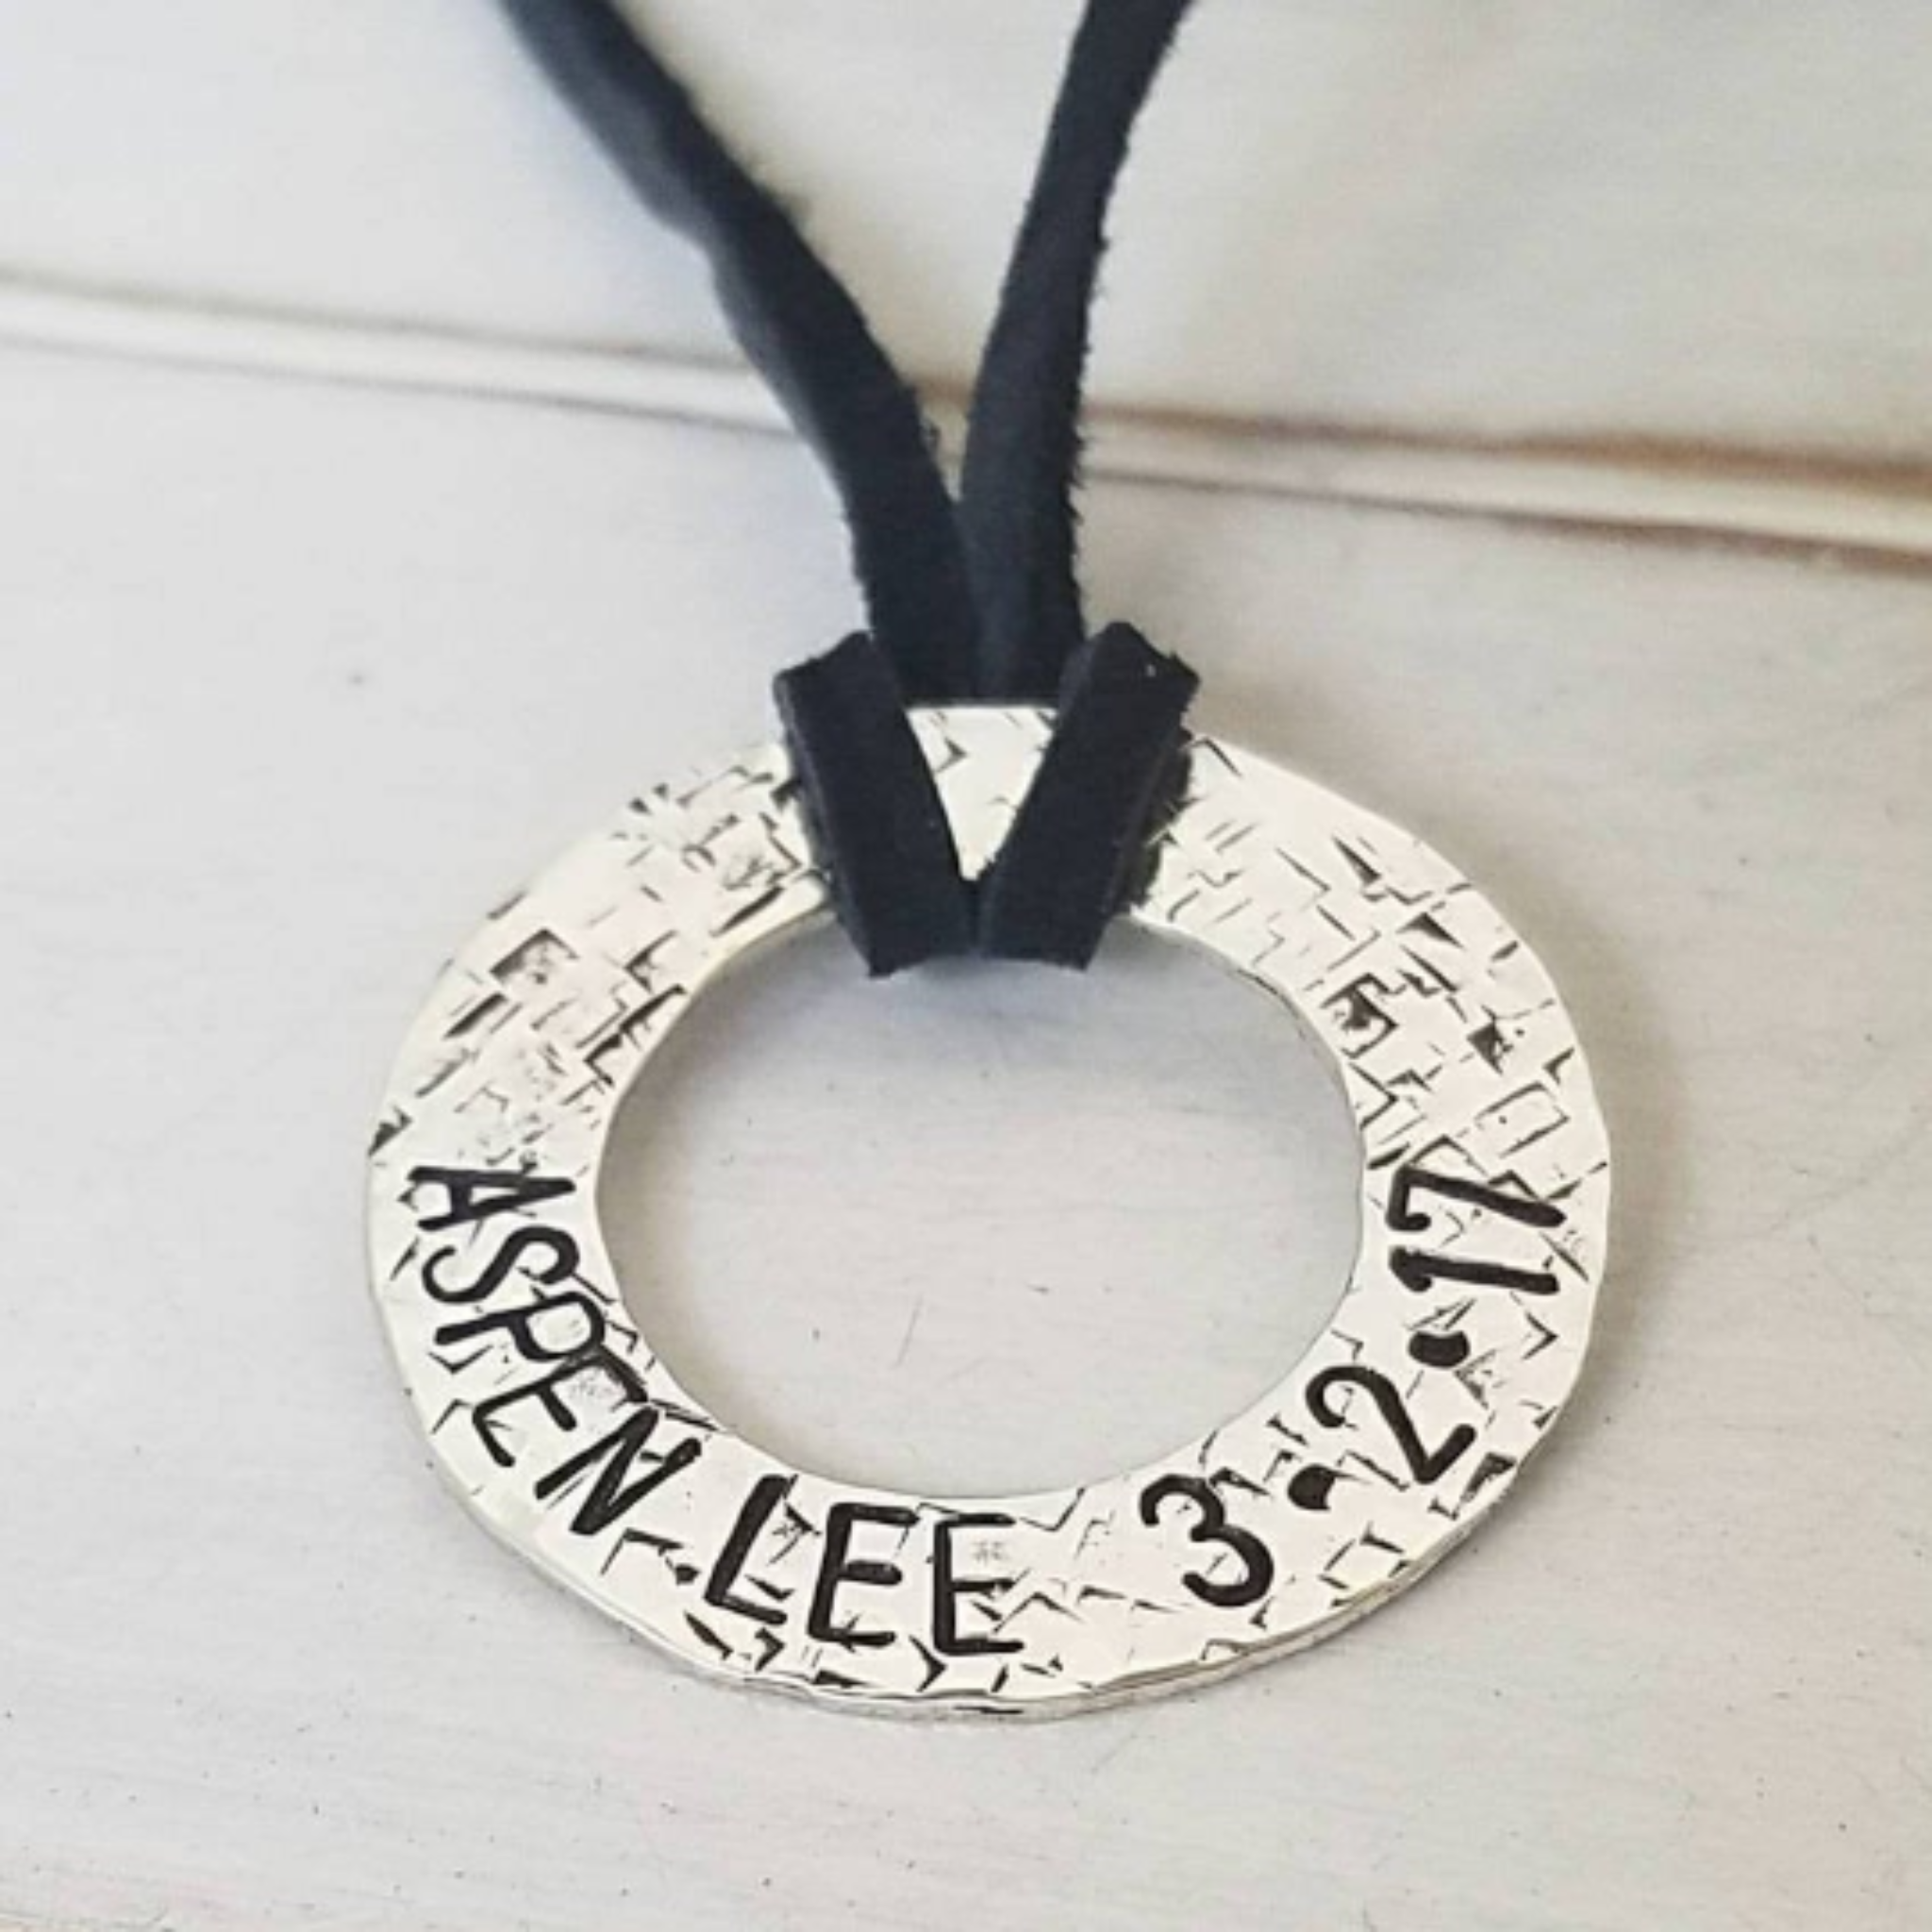 Men's Personalized Washer Necklace - Sterling Silver - Daddy Necklace